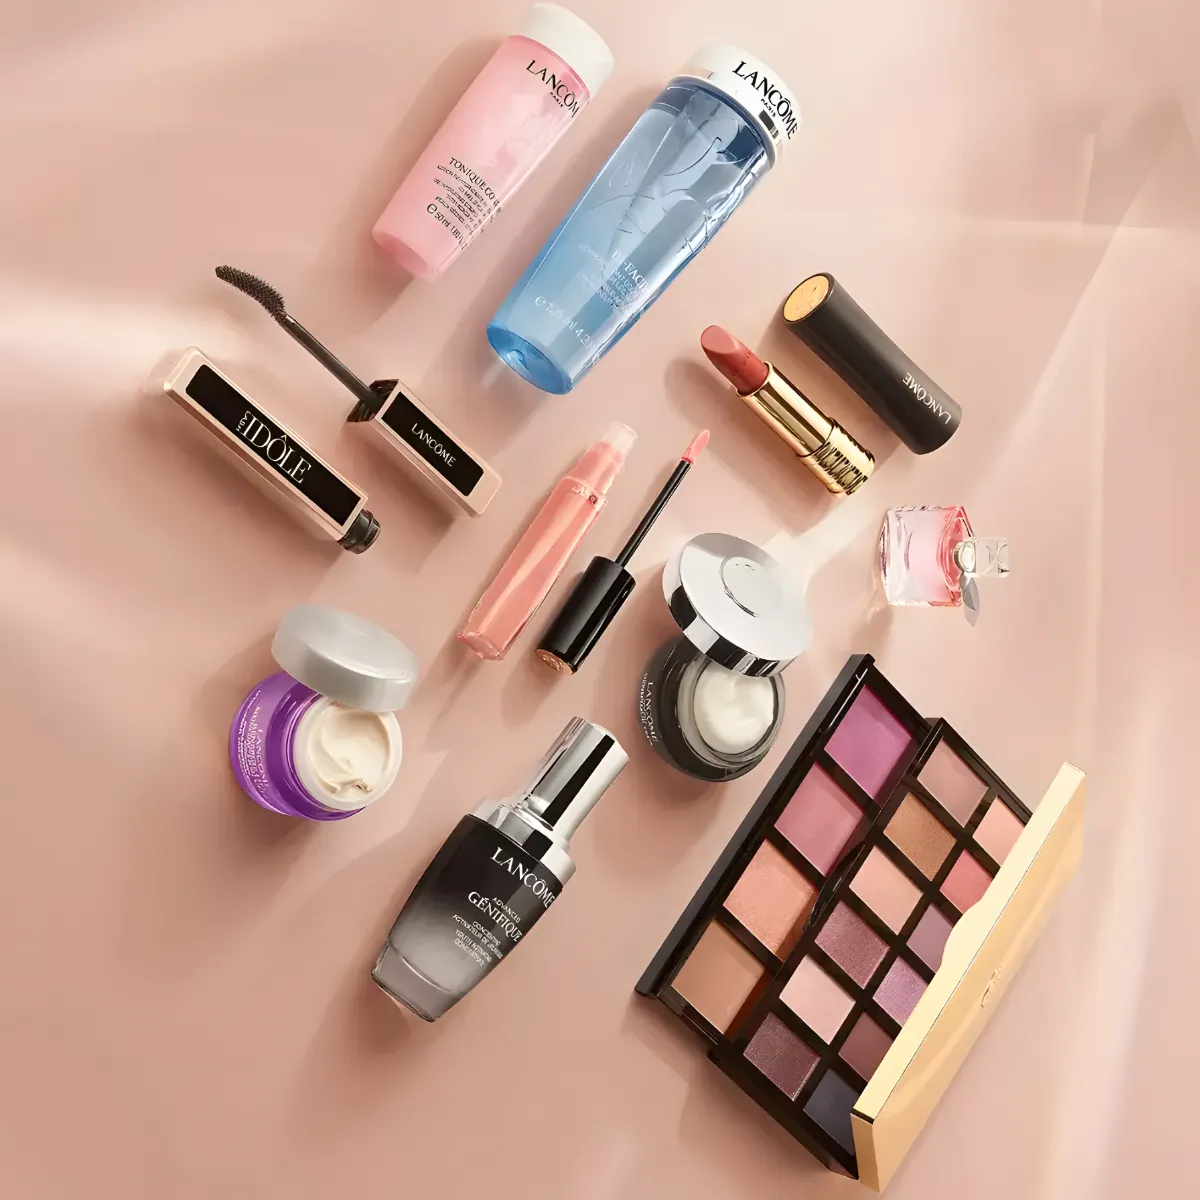 Free Lancôme Product Samples For The Community Members